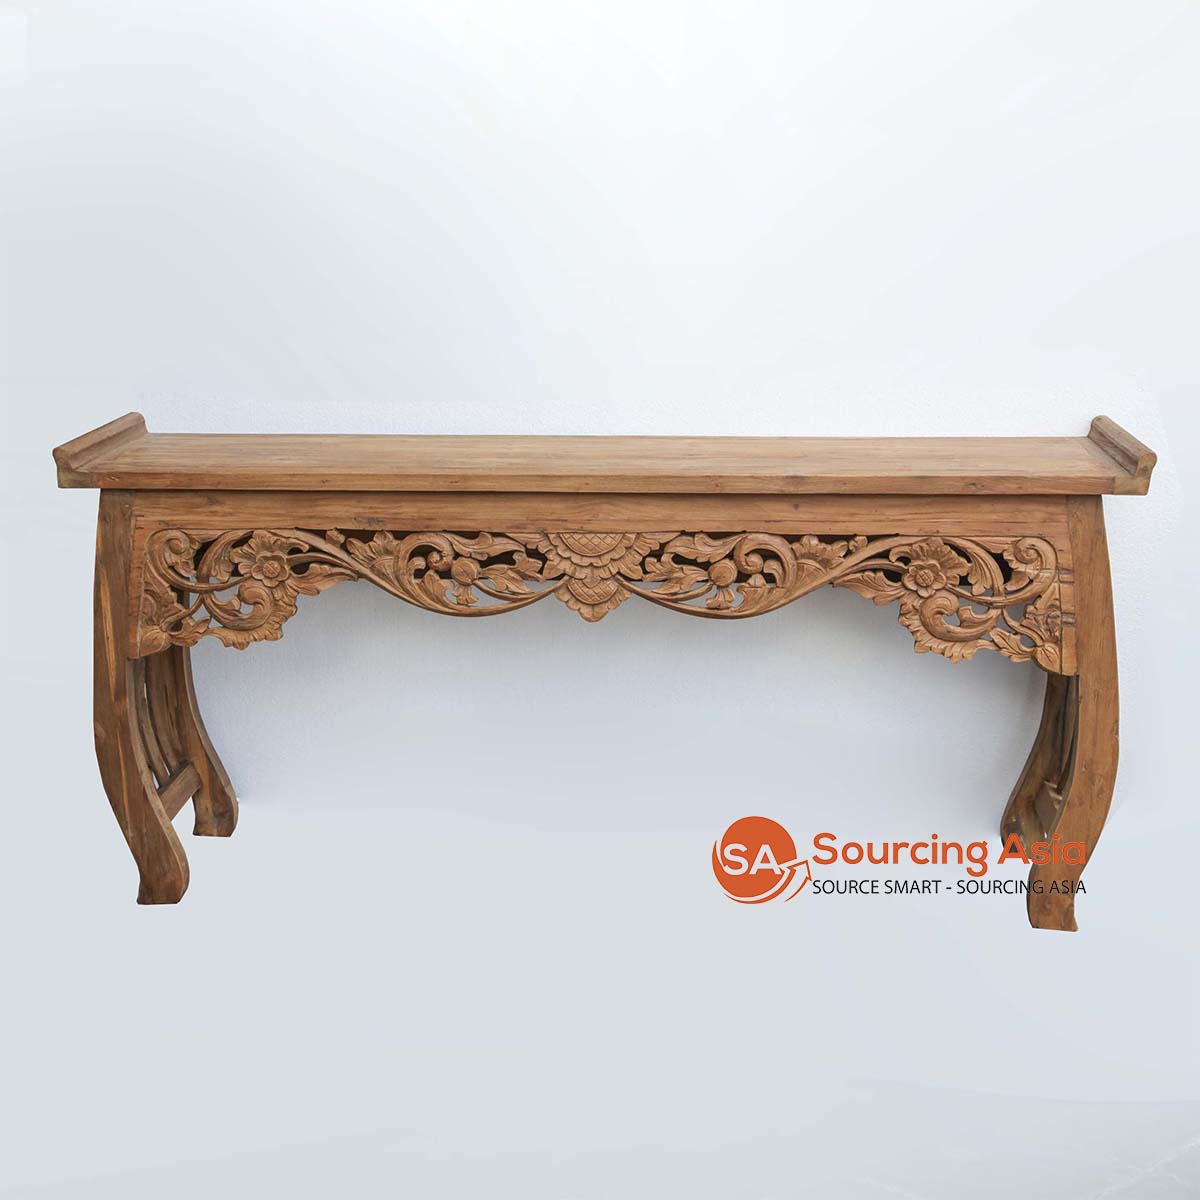 LAC045-4 NATURAL EAST COLONIAL CARVED CONSOLE TABLE